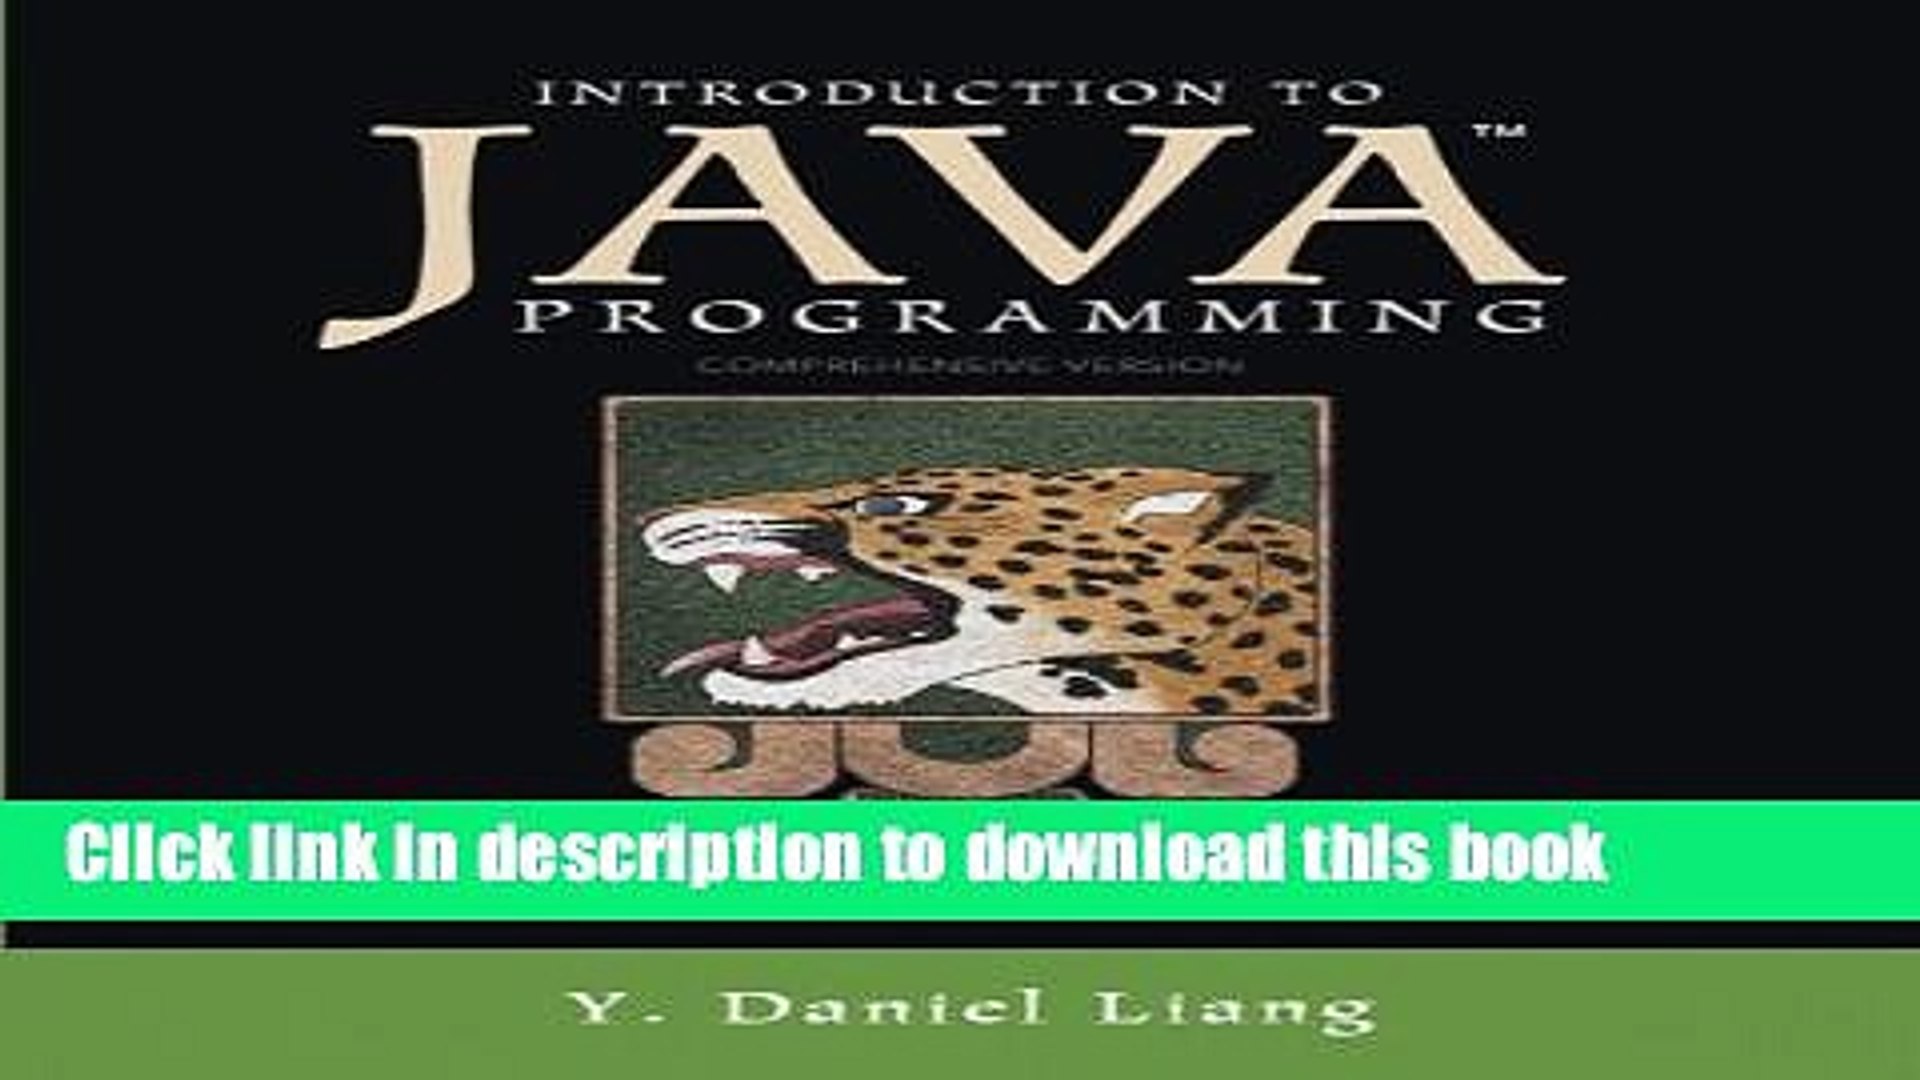 [Popular] Introduction to Java Programming, Comprehensive Version (9th Edition) Hardcover